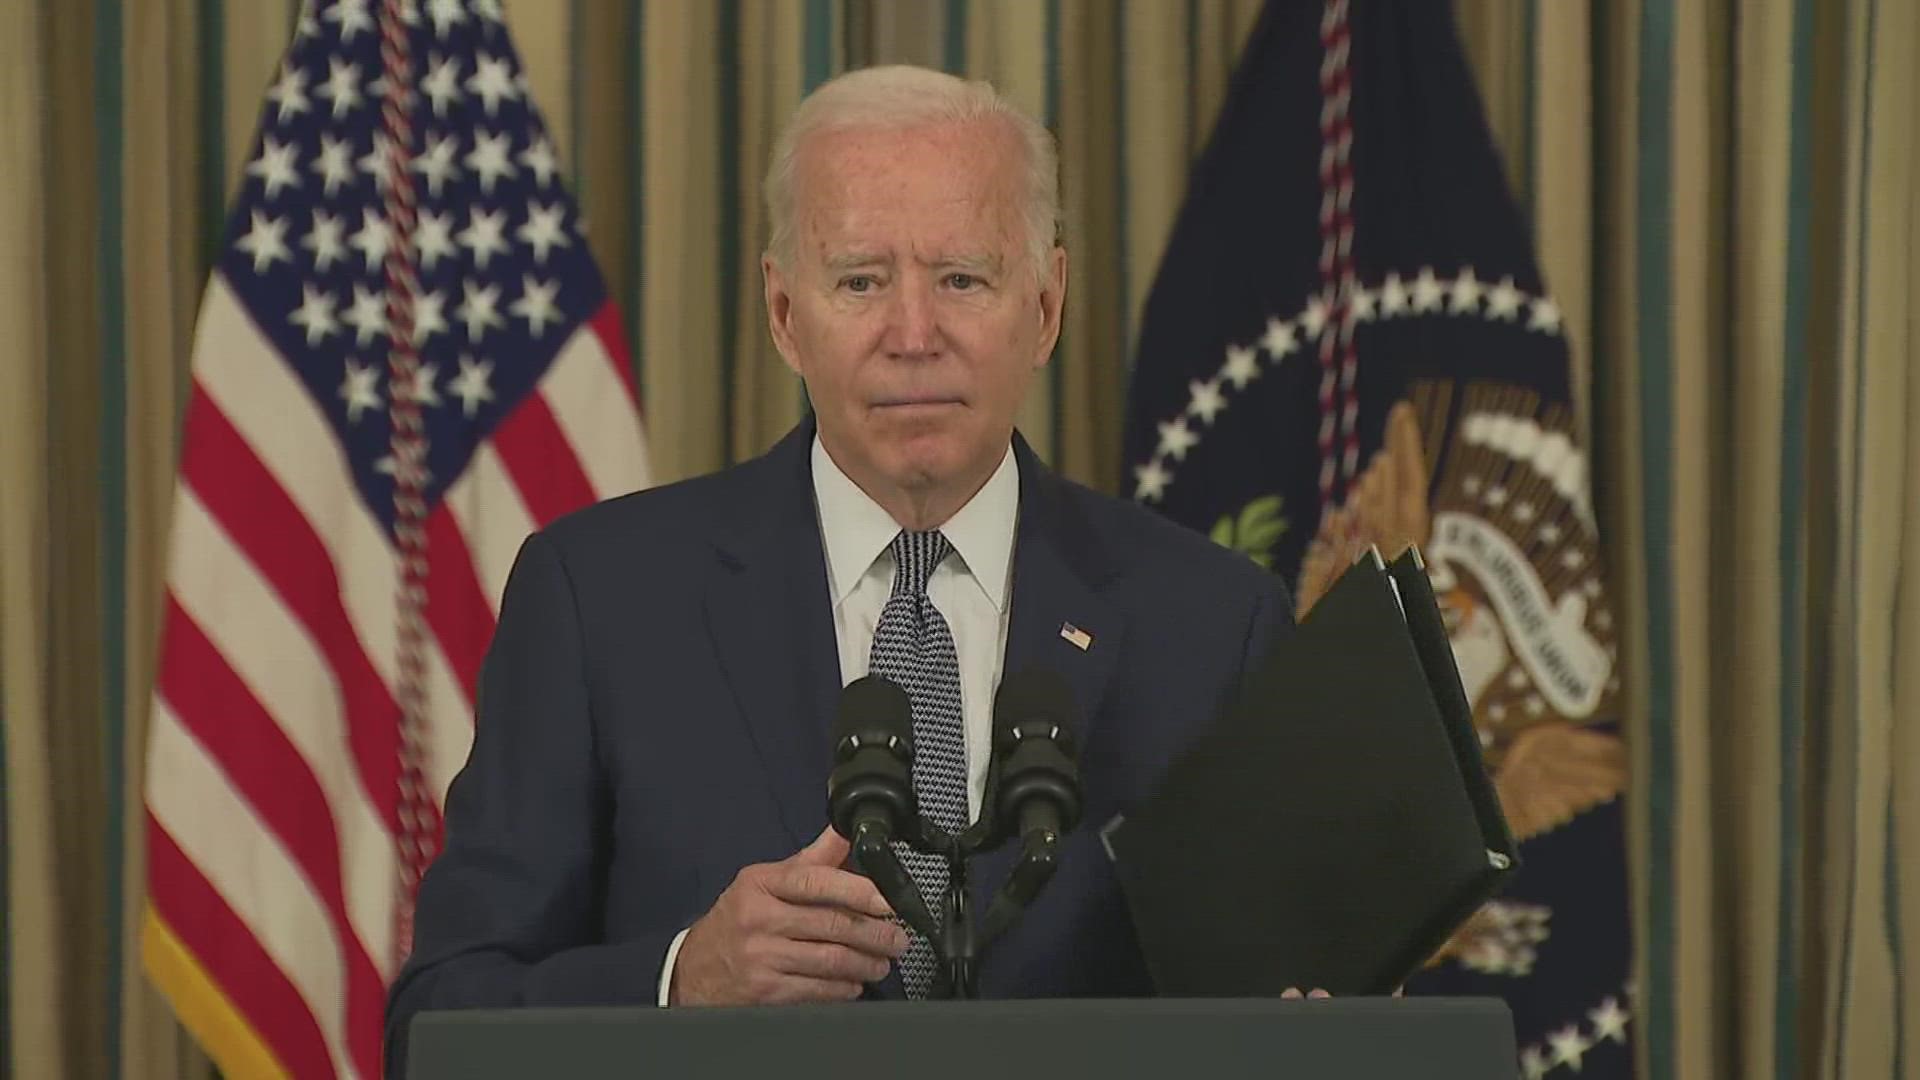 Biden reiterates support for Roe v. Wade amid ...